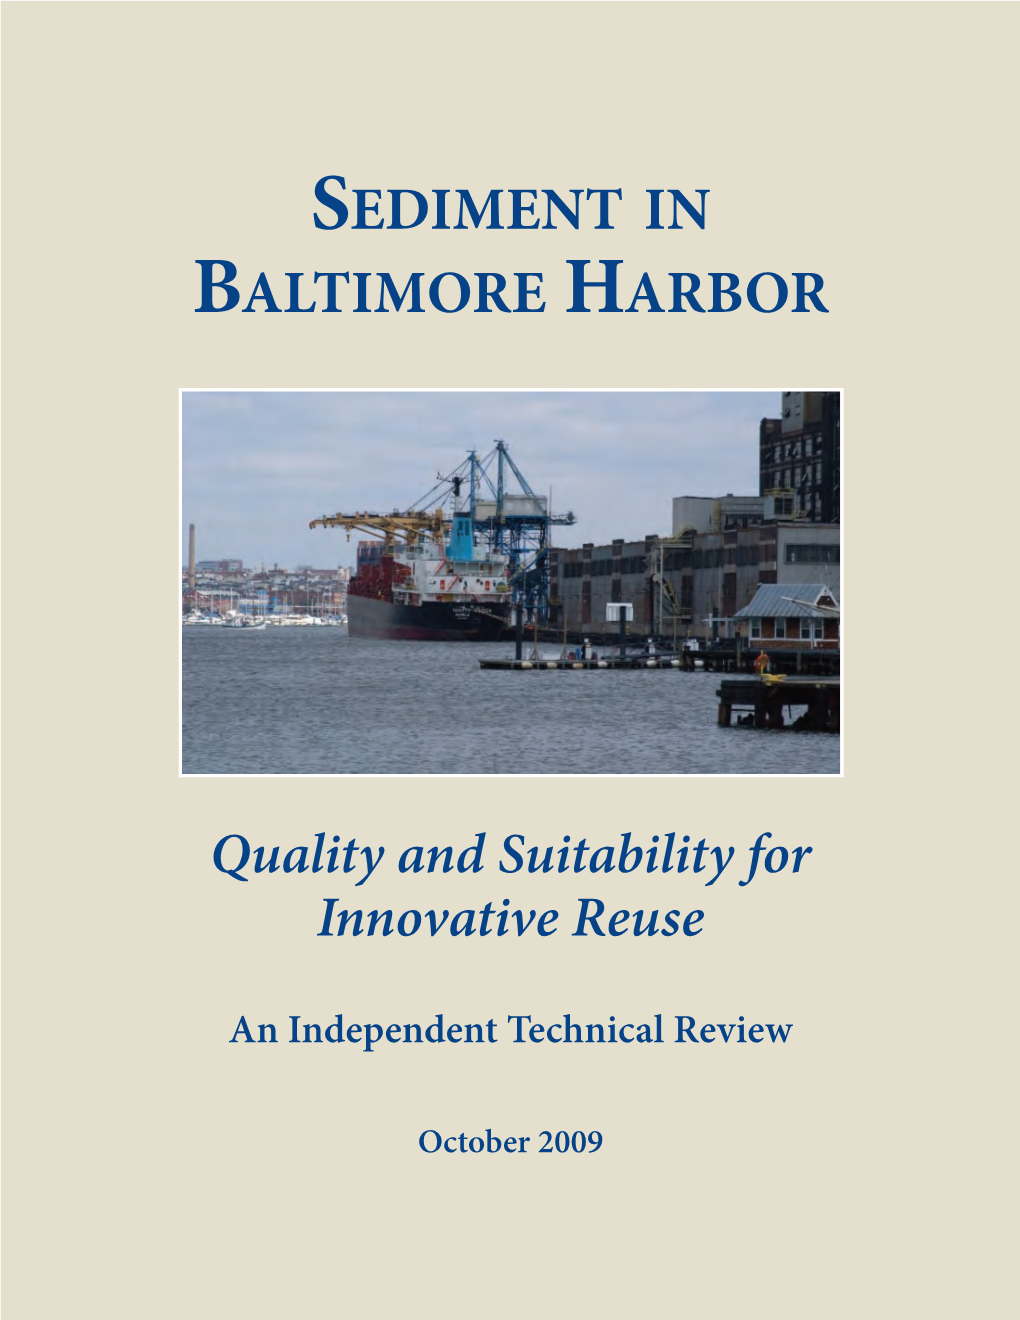 Sediment in Baltimore Harbor: Quality and Suitability for Innovative Reuse